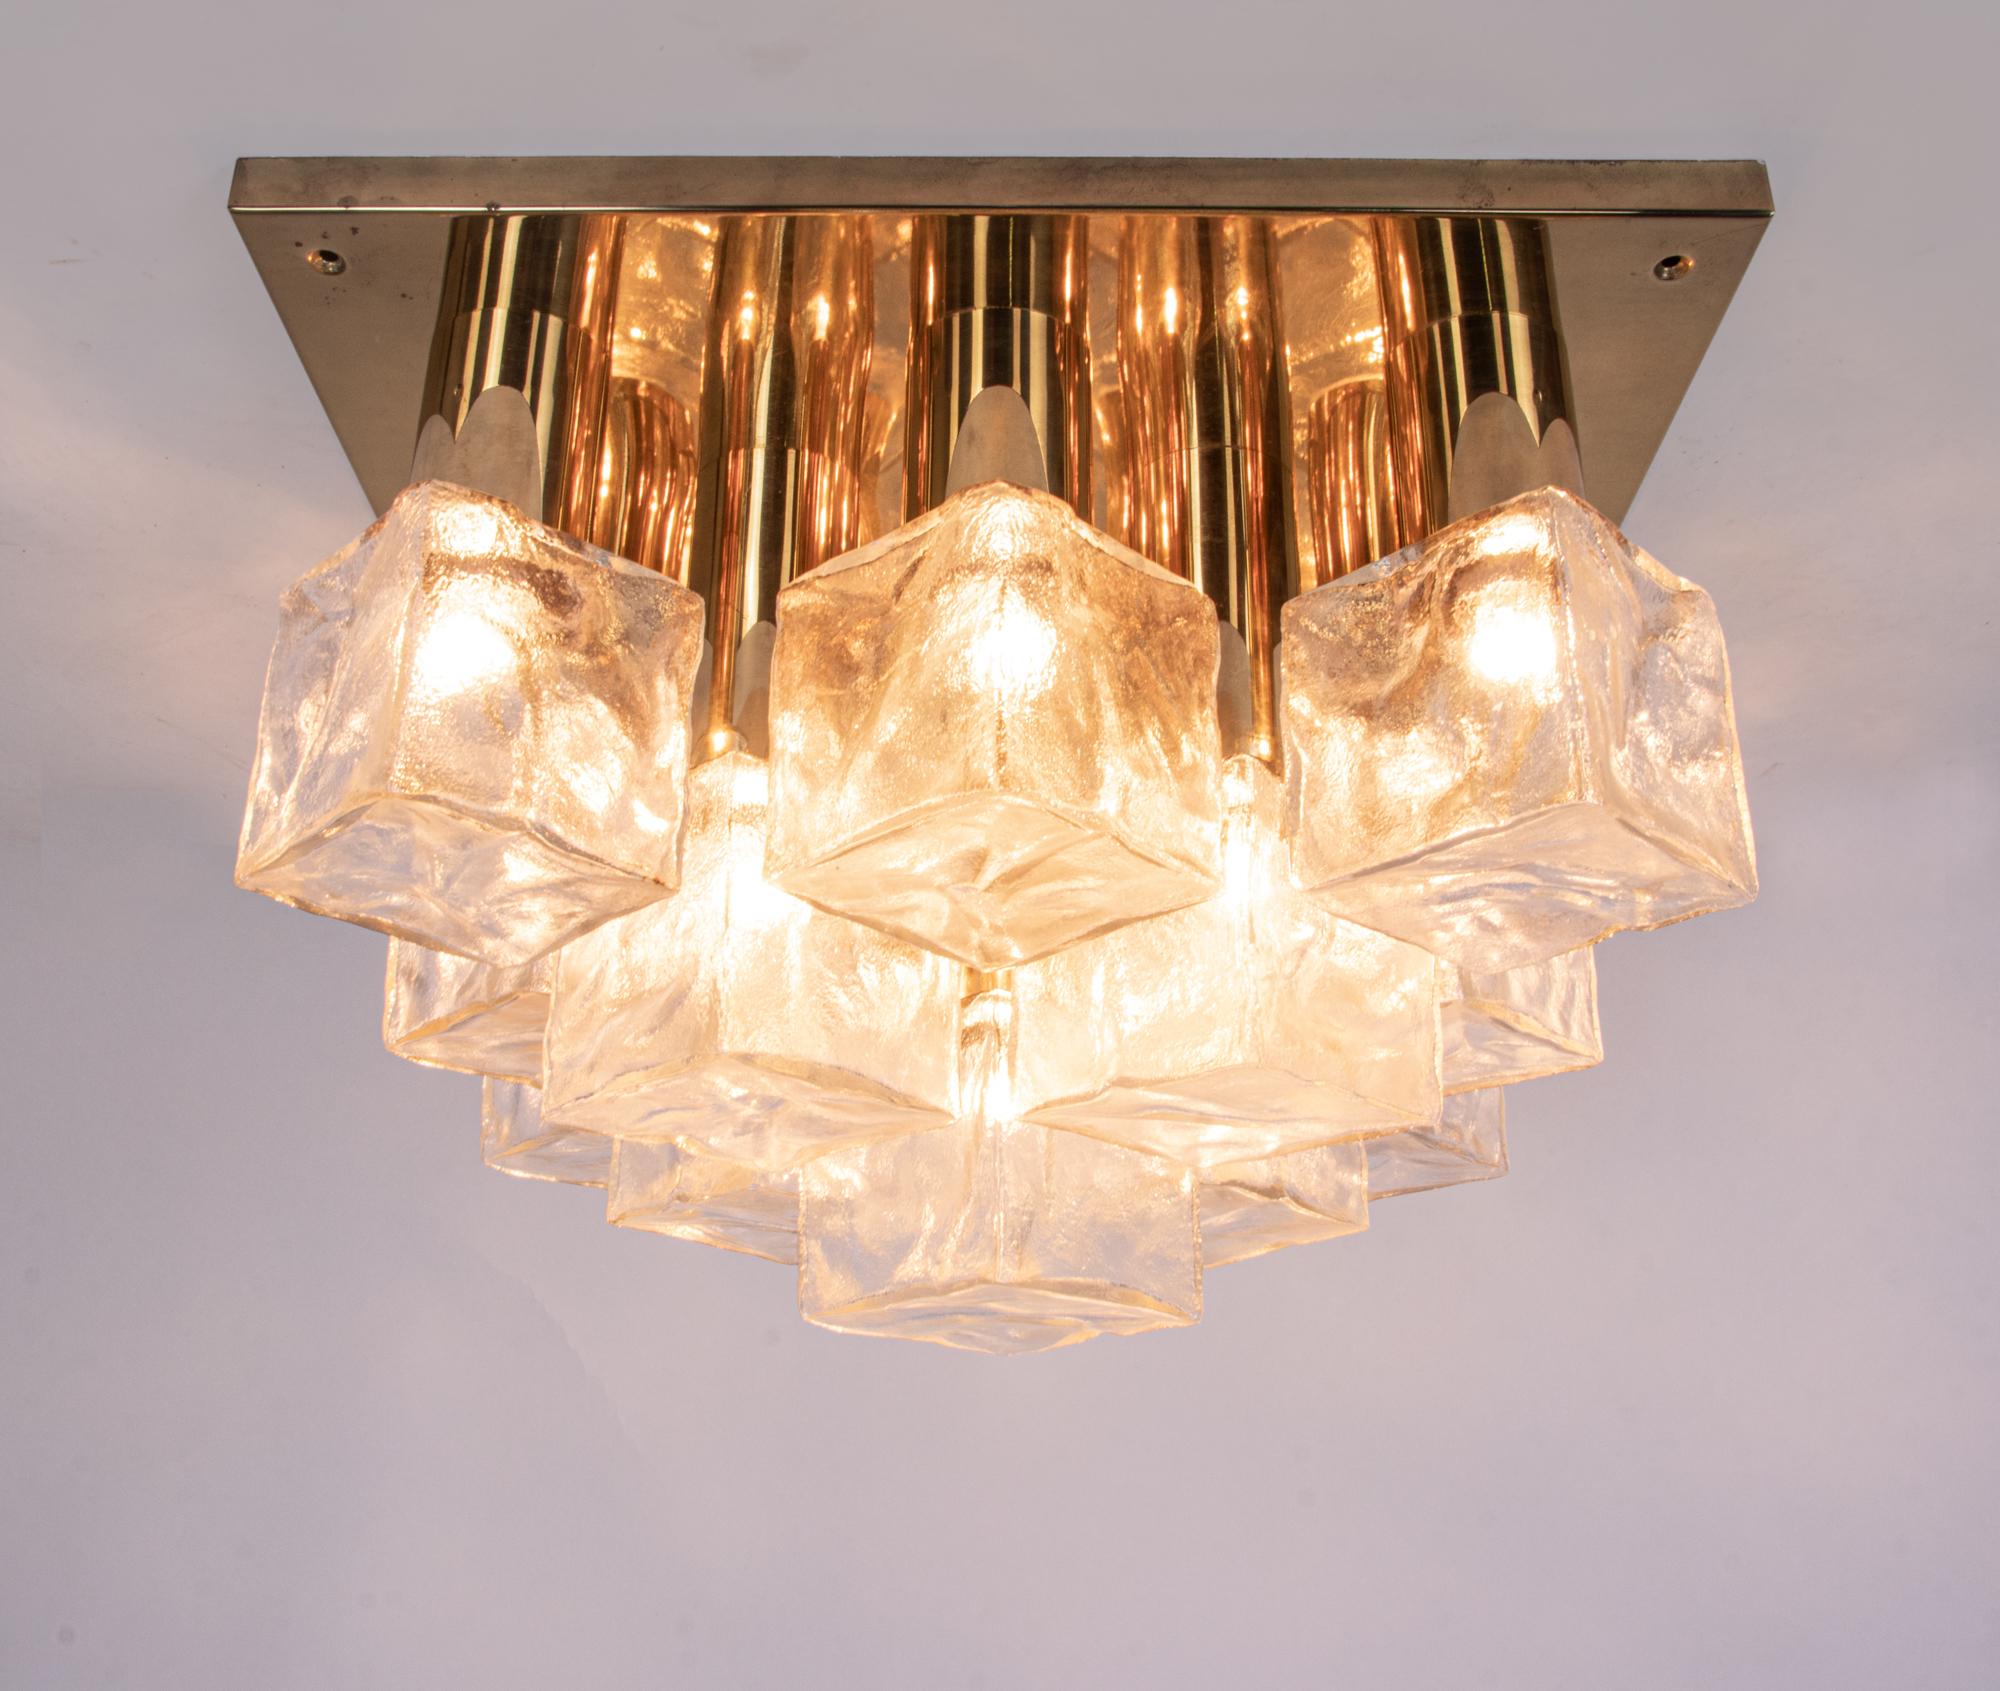 Elegant flush mount ceiling light with 13 ice glass cubes on a golden brass frame. Manufactured by J.T. Kalmar, Austria in the 1960s. 
  
Measures: width total 18.1” in. (46 cm), depth 18.1” in. (46 cm), diameter frame only 11.8” in. (34 cm).